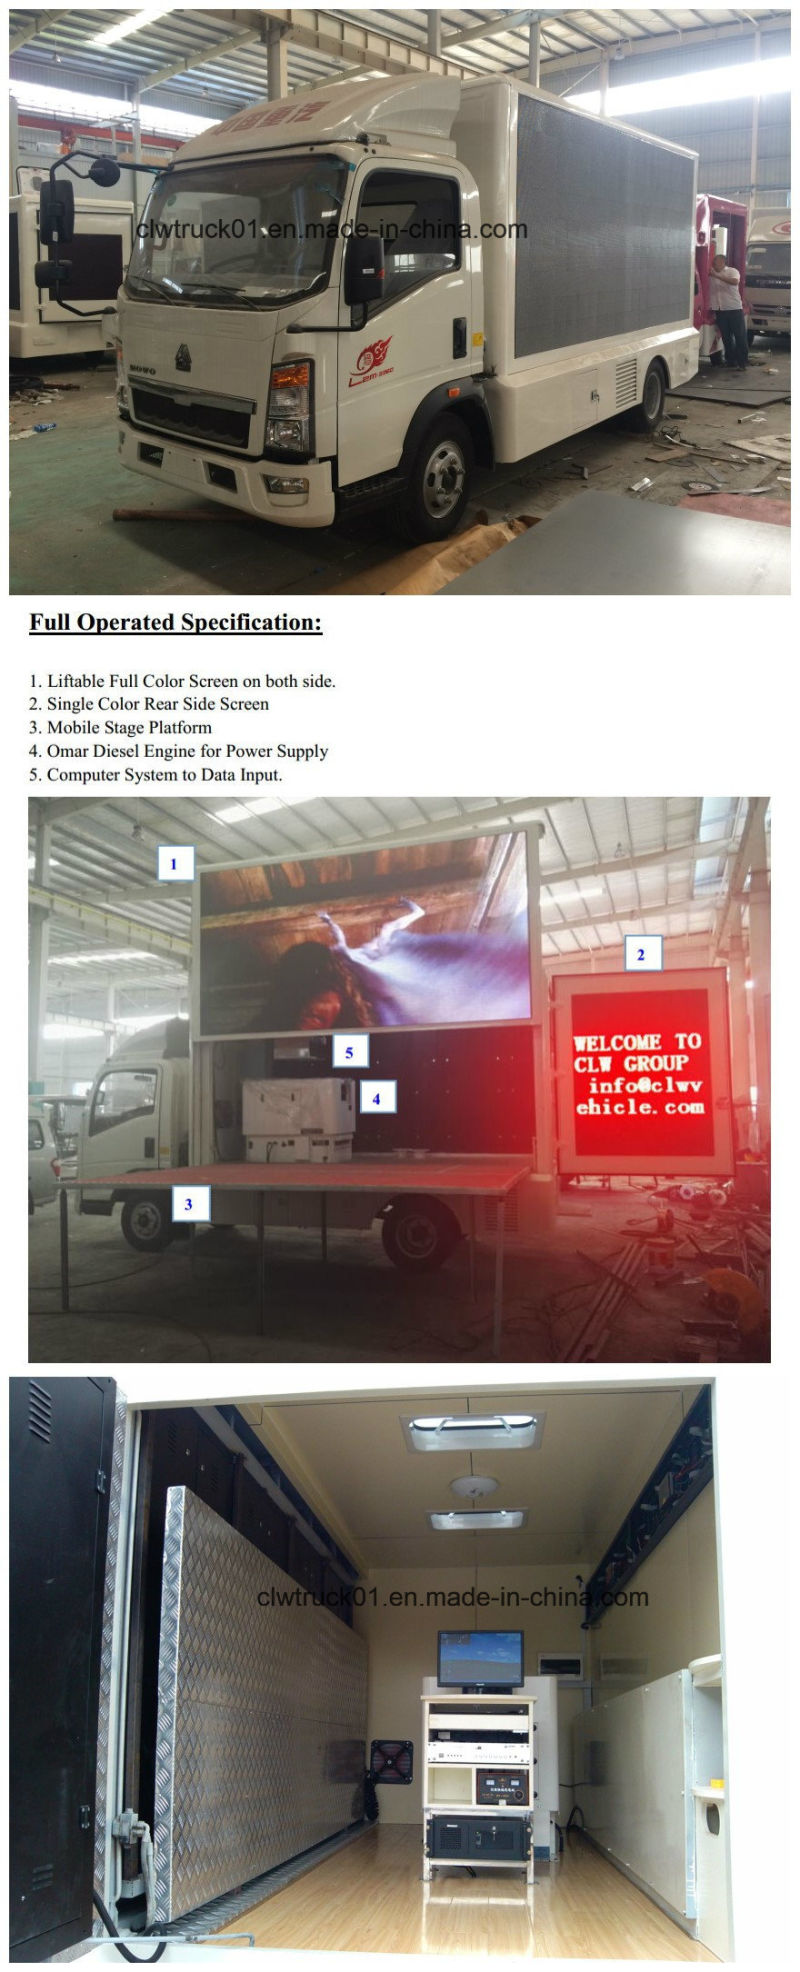 Double Sided LED Screen Small P8/P10 LED Screen Trucks